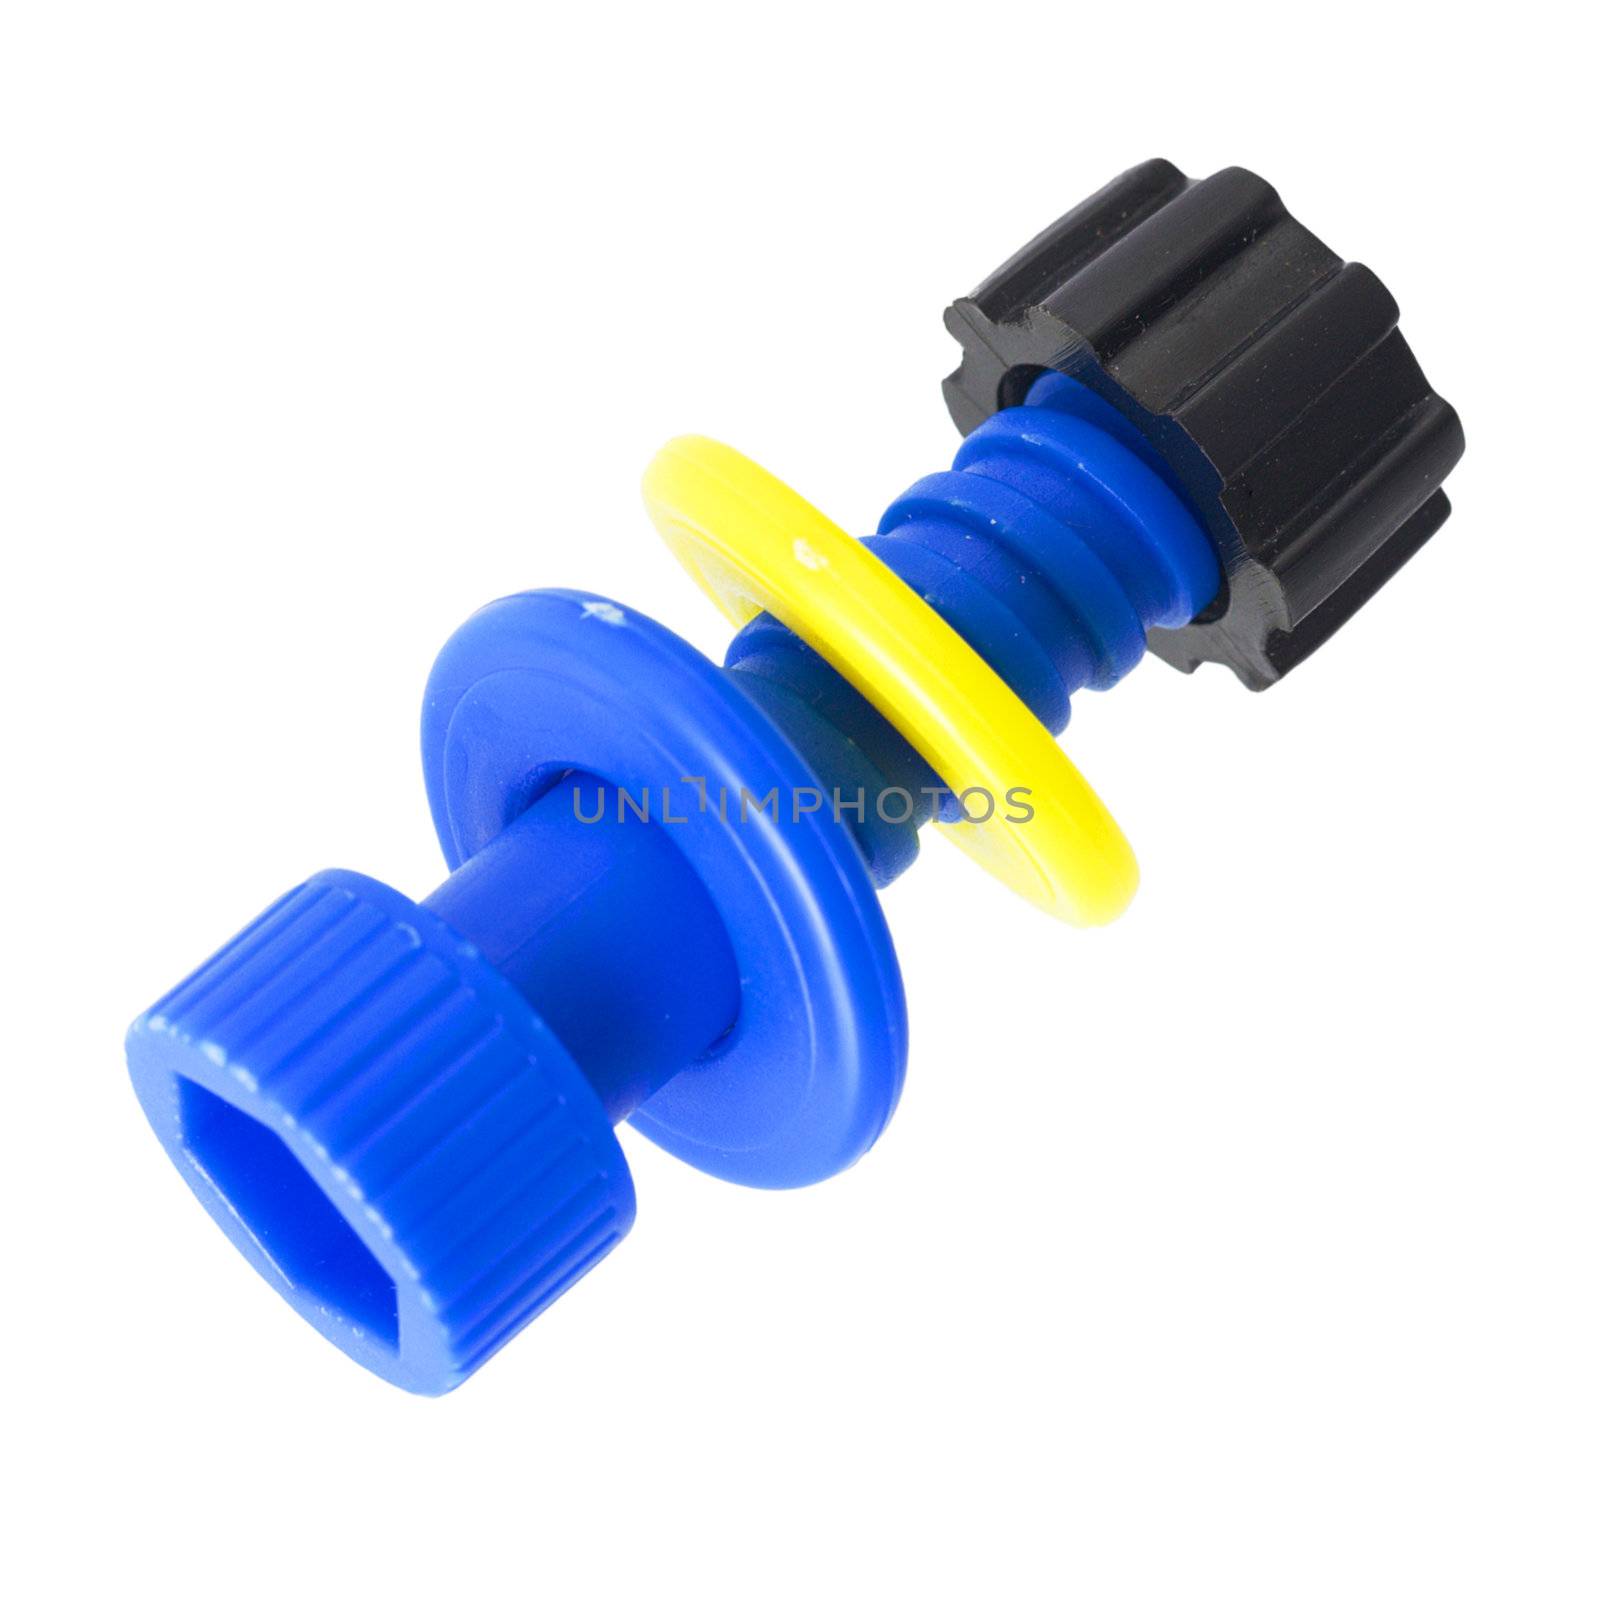 Blue plastic bolt wiht yellow and black nuts on the white background